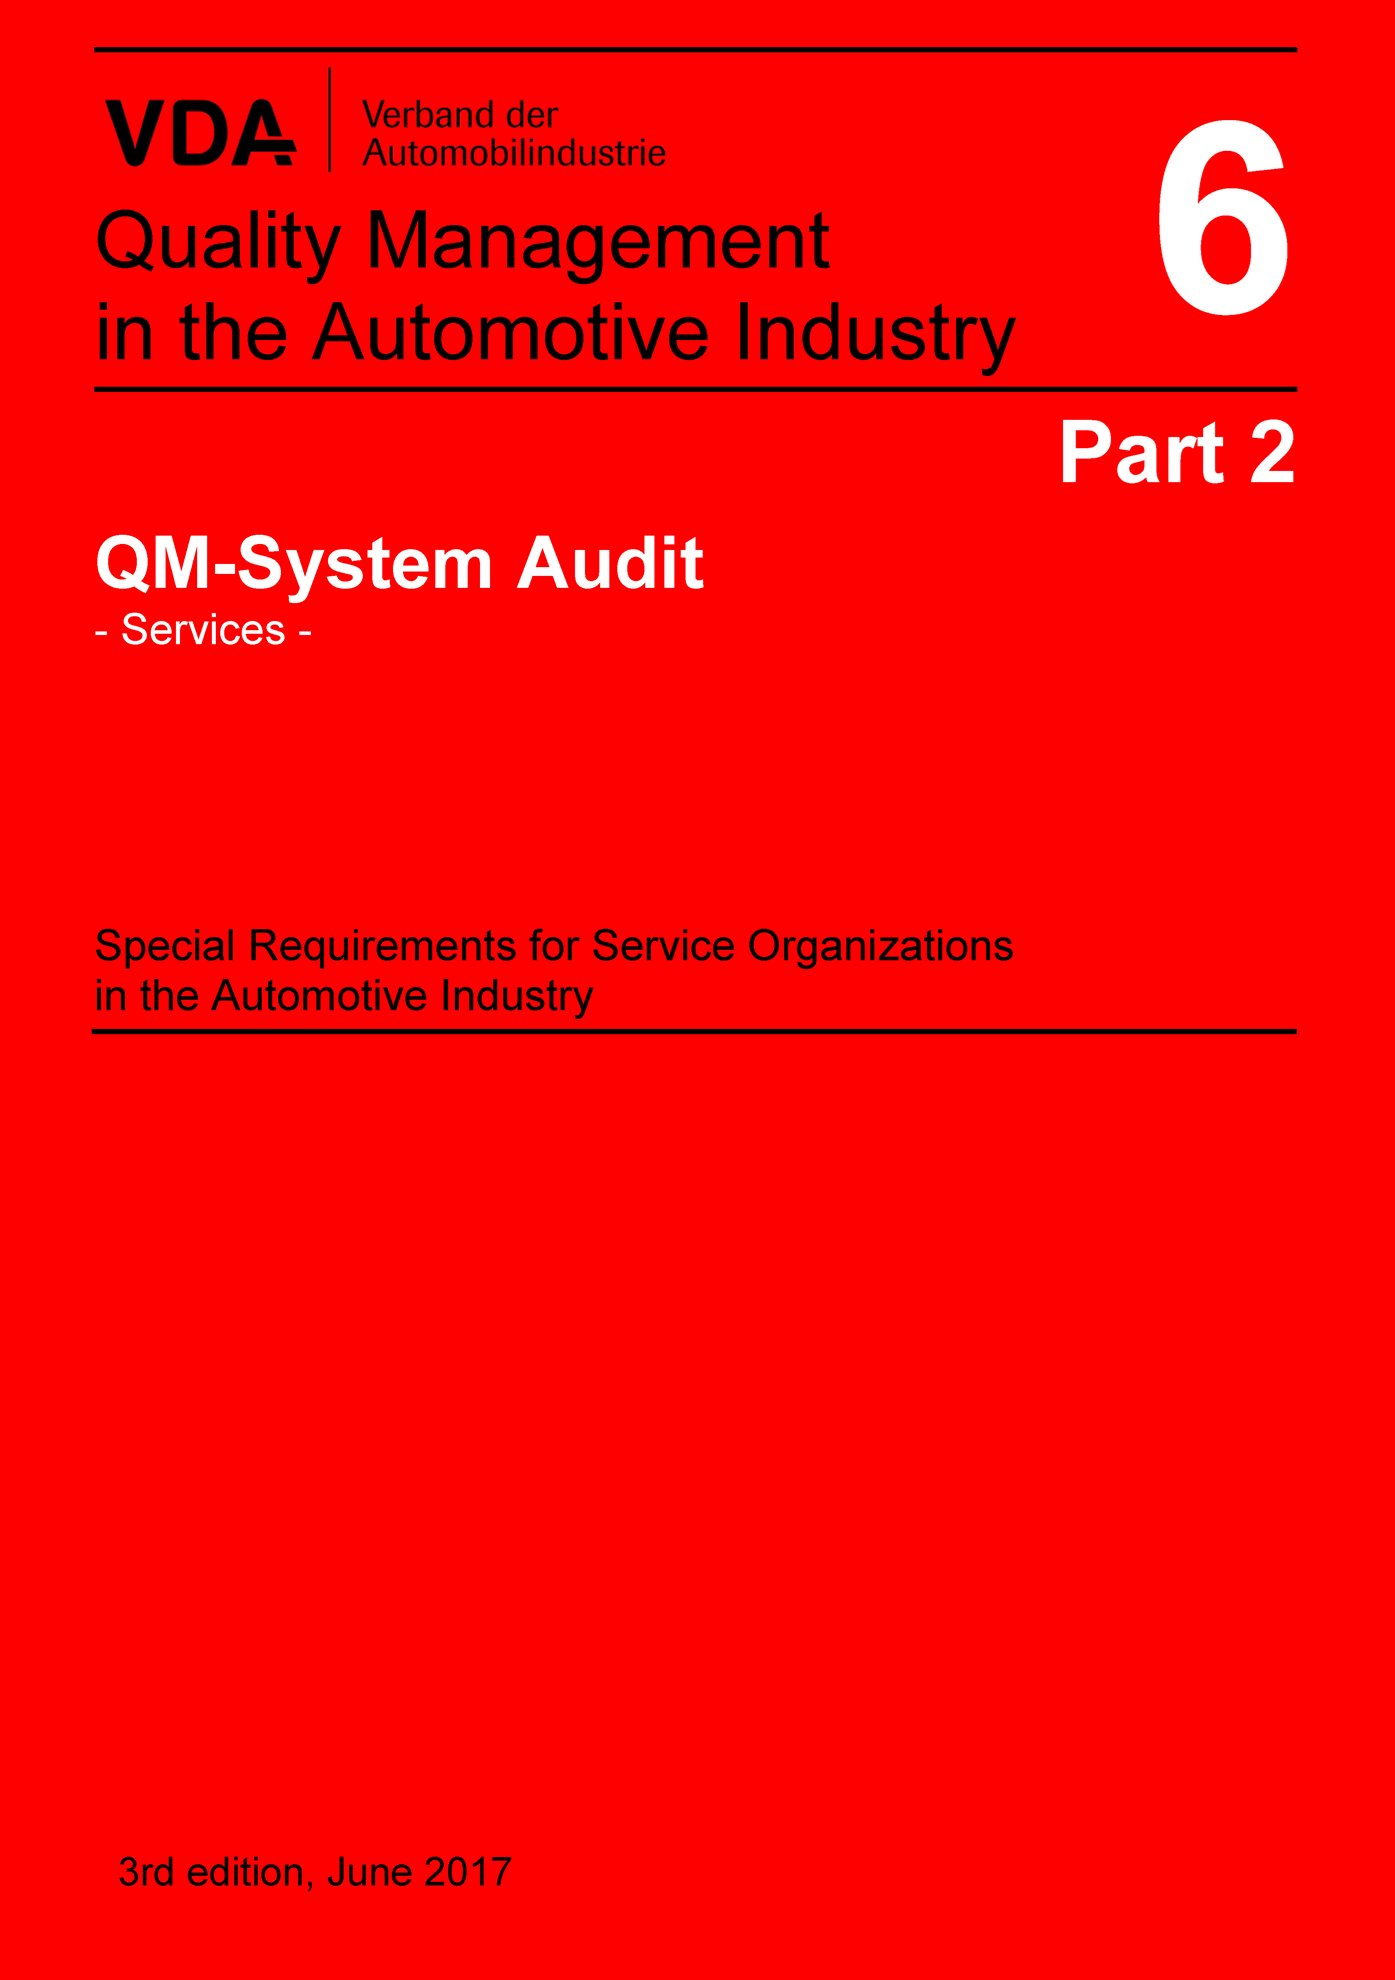 Publications  VDA Volume 6 Part 2_QM System Audit - Services -
 Special Requirements for Service Organizations in the Automotive Industry
 3rd Edition, June 2017 1.6.2017 preview